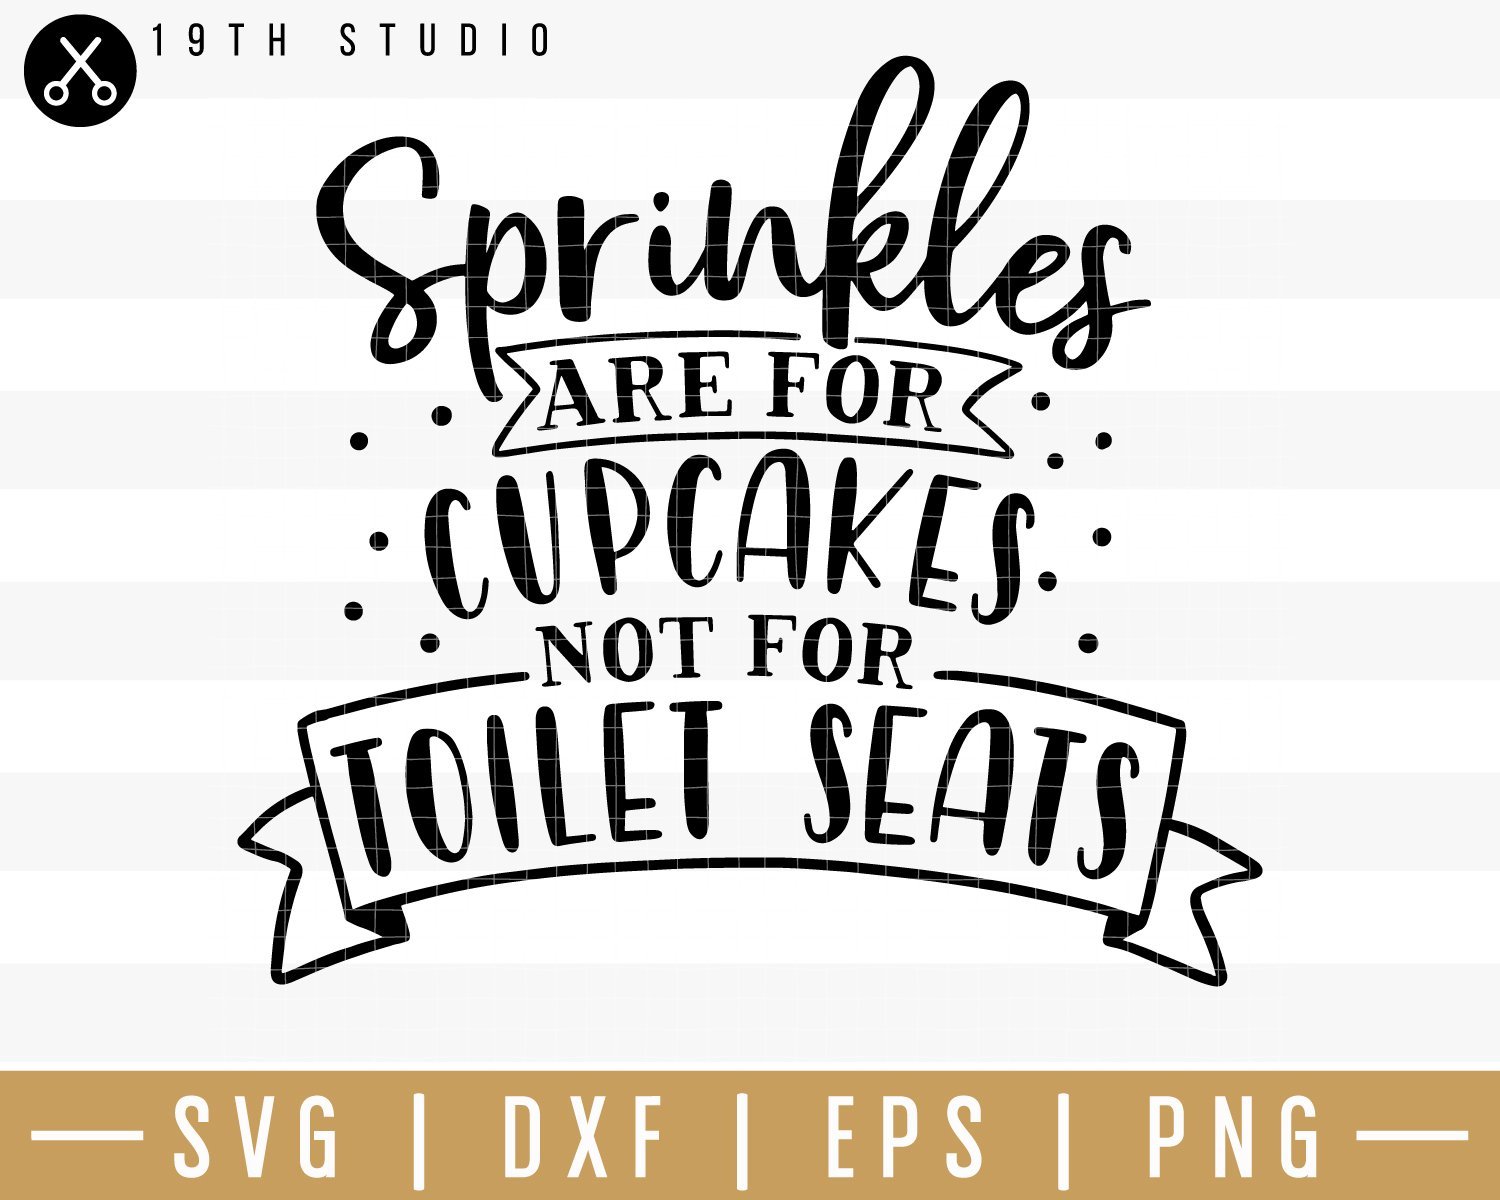 Sprinkles are for cupcakes not for toilet seats SVG | M32F14 Craft House SVG - SVG files for Cricut and Silhouette